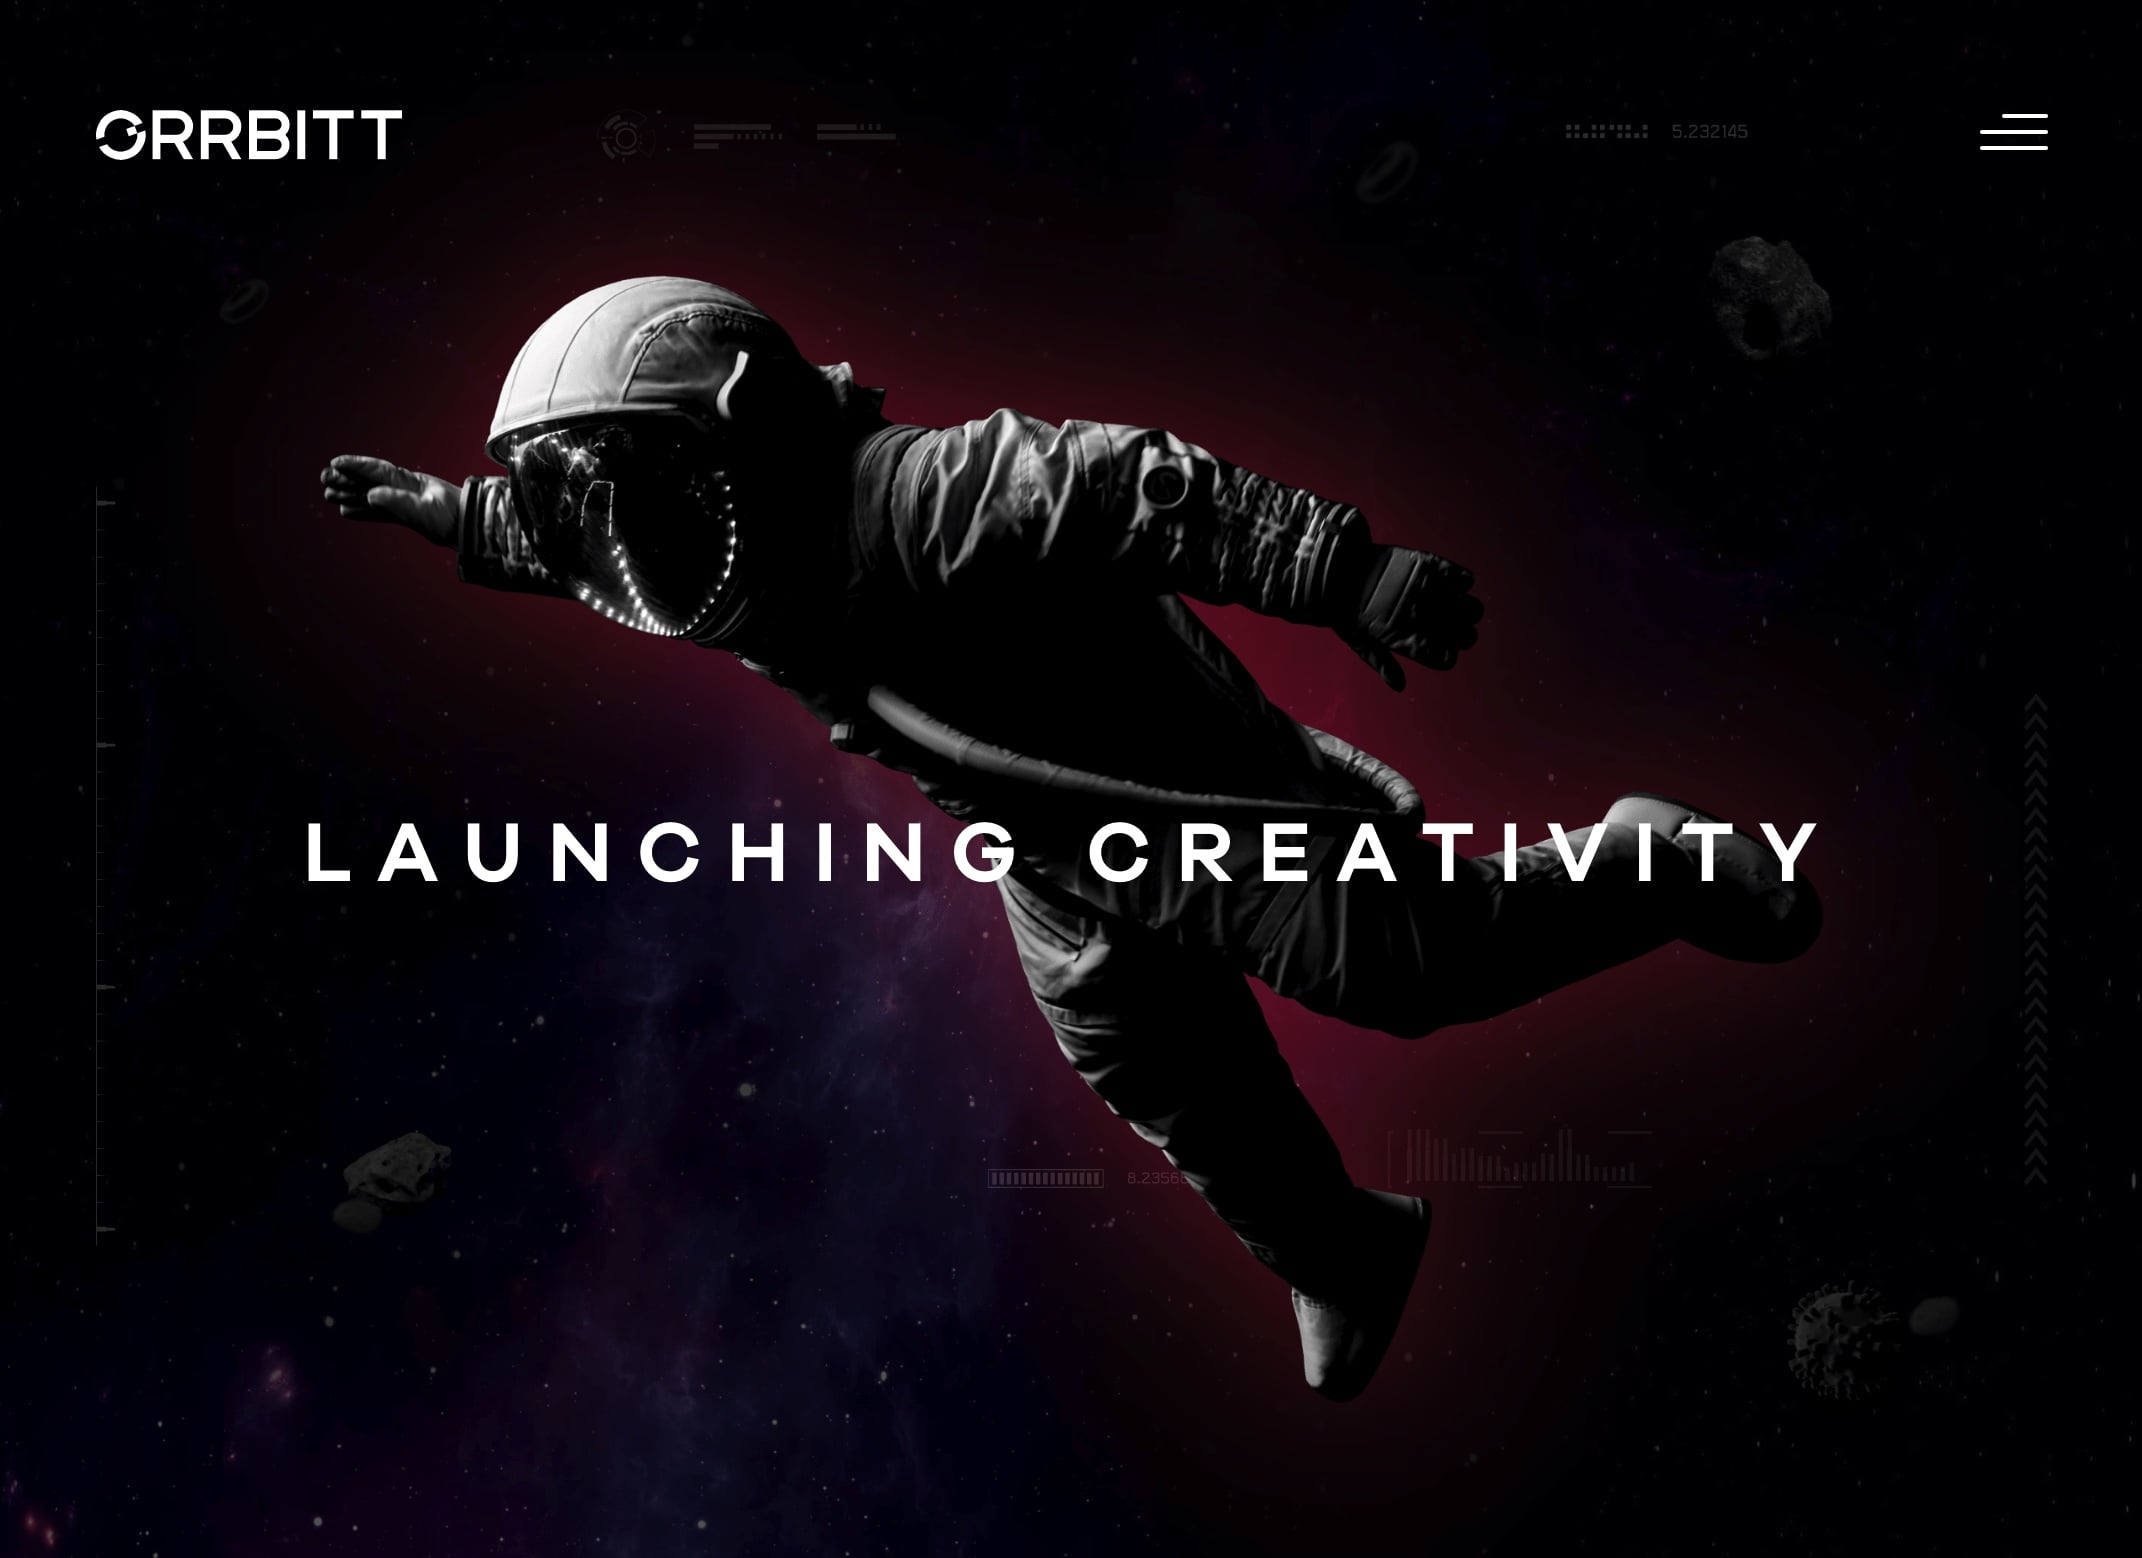 screenshot of Orrbitt site homepage with text "Launching Creativity" over a floating astronaut